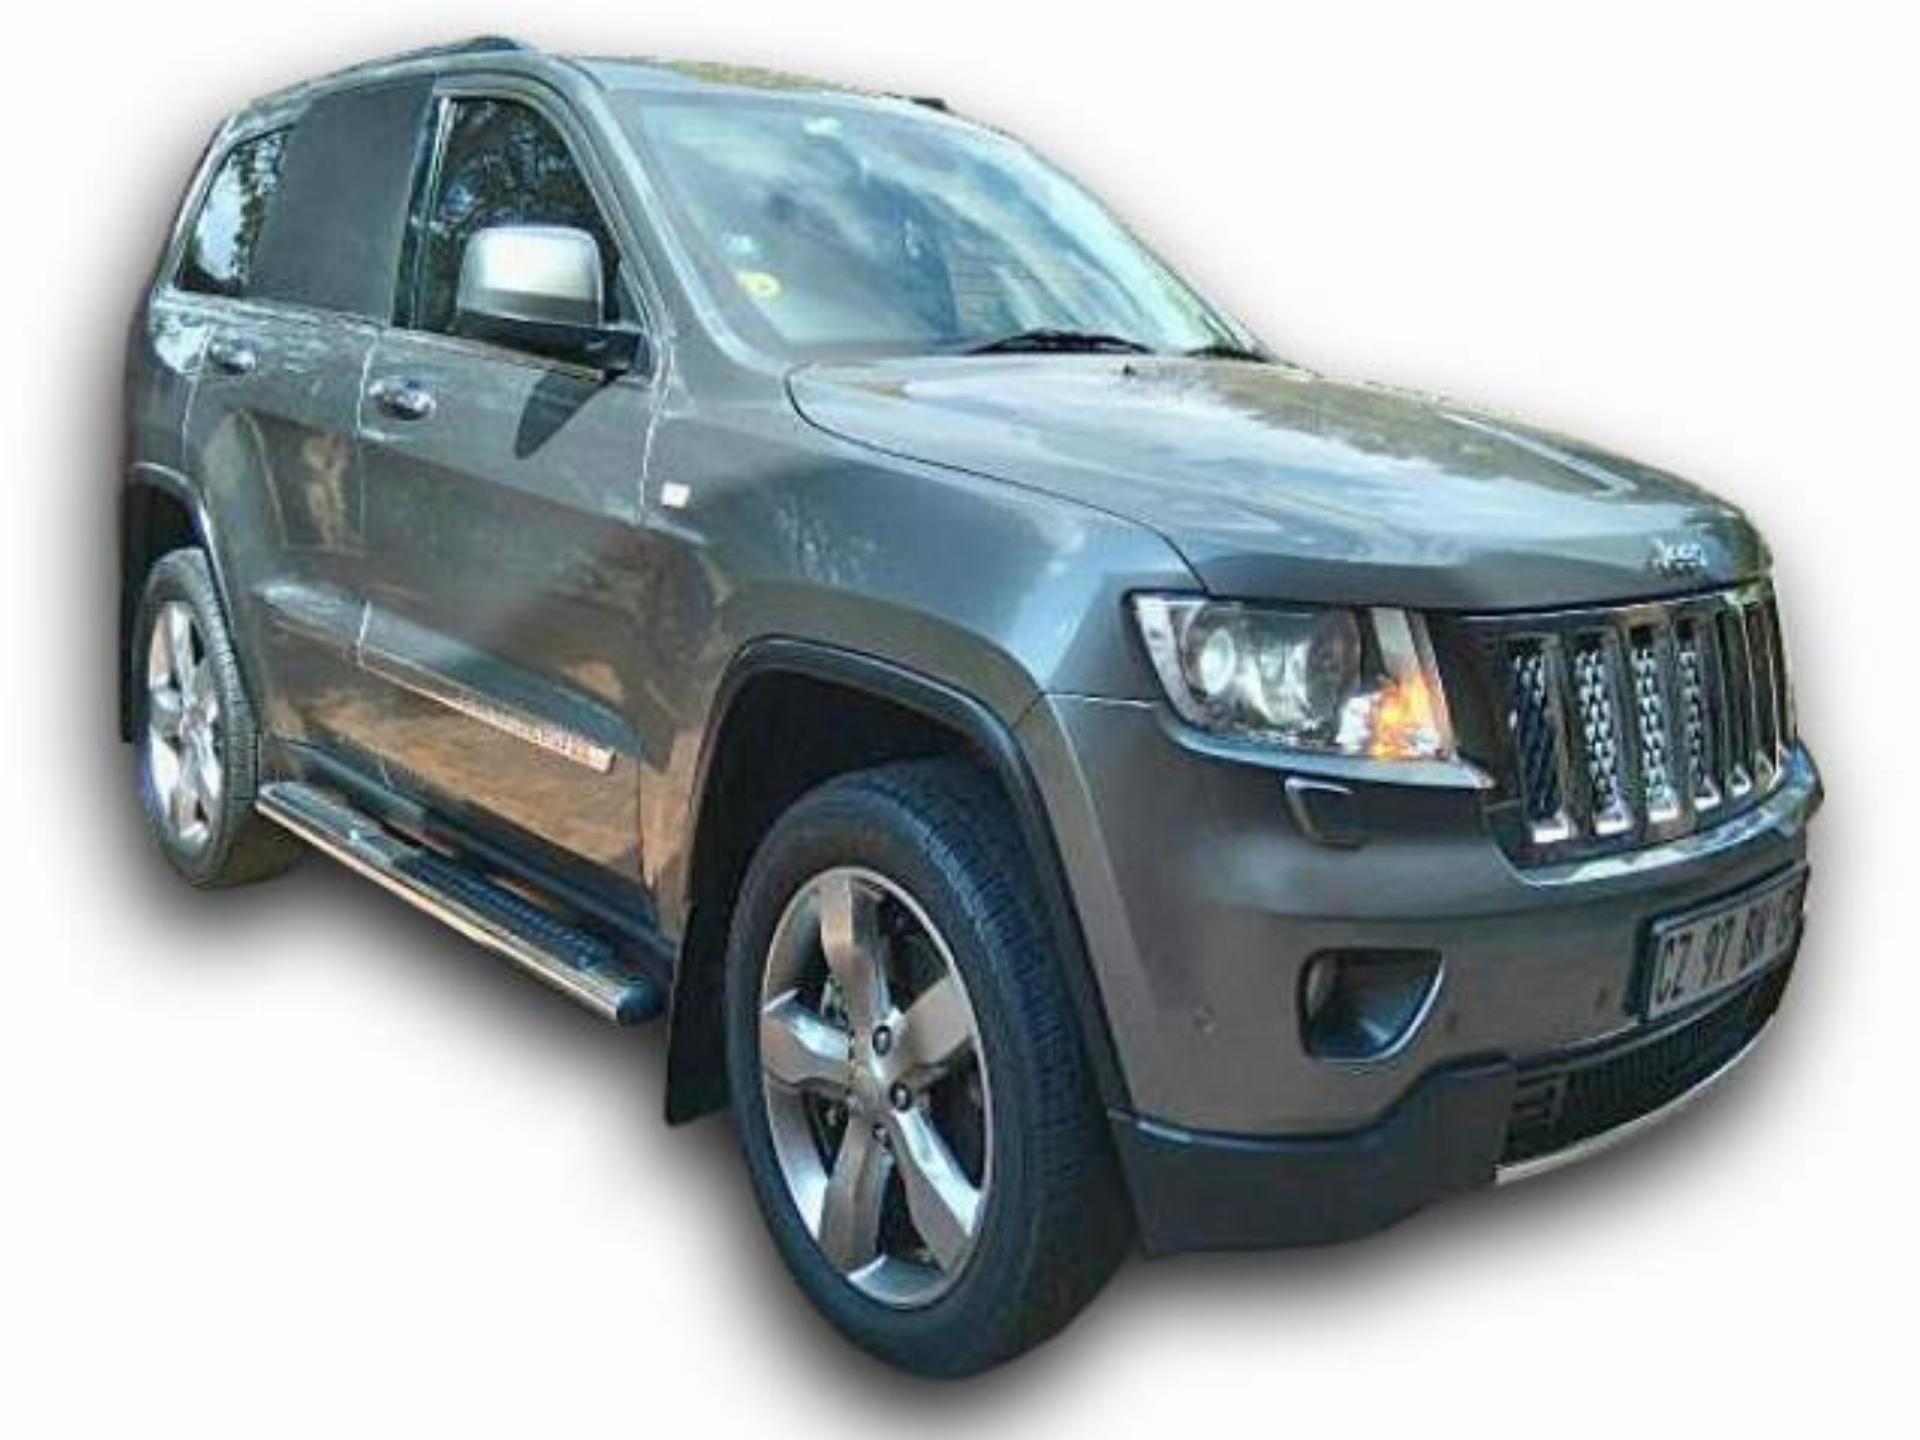 Used Jeep Grand Cherokee 3.6 Overland 2012 on auction